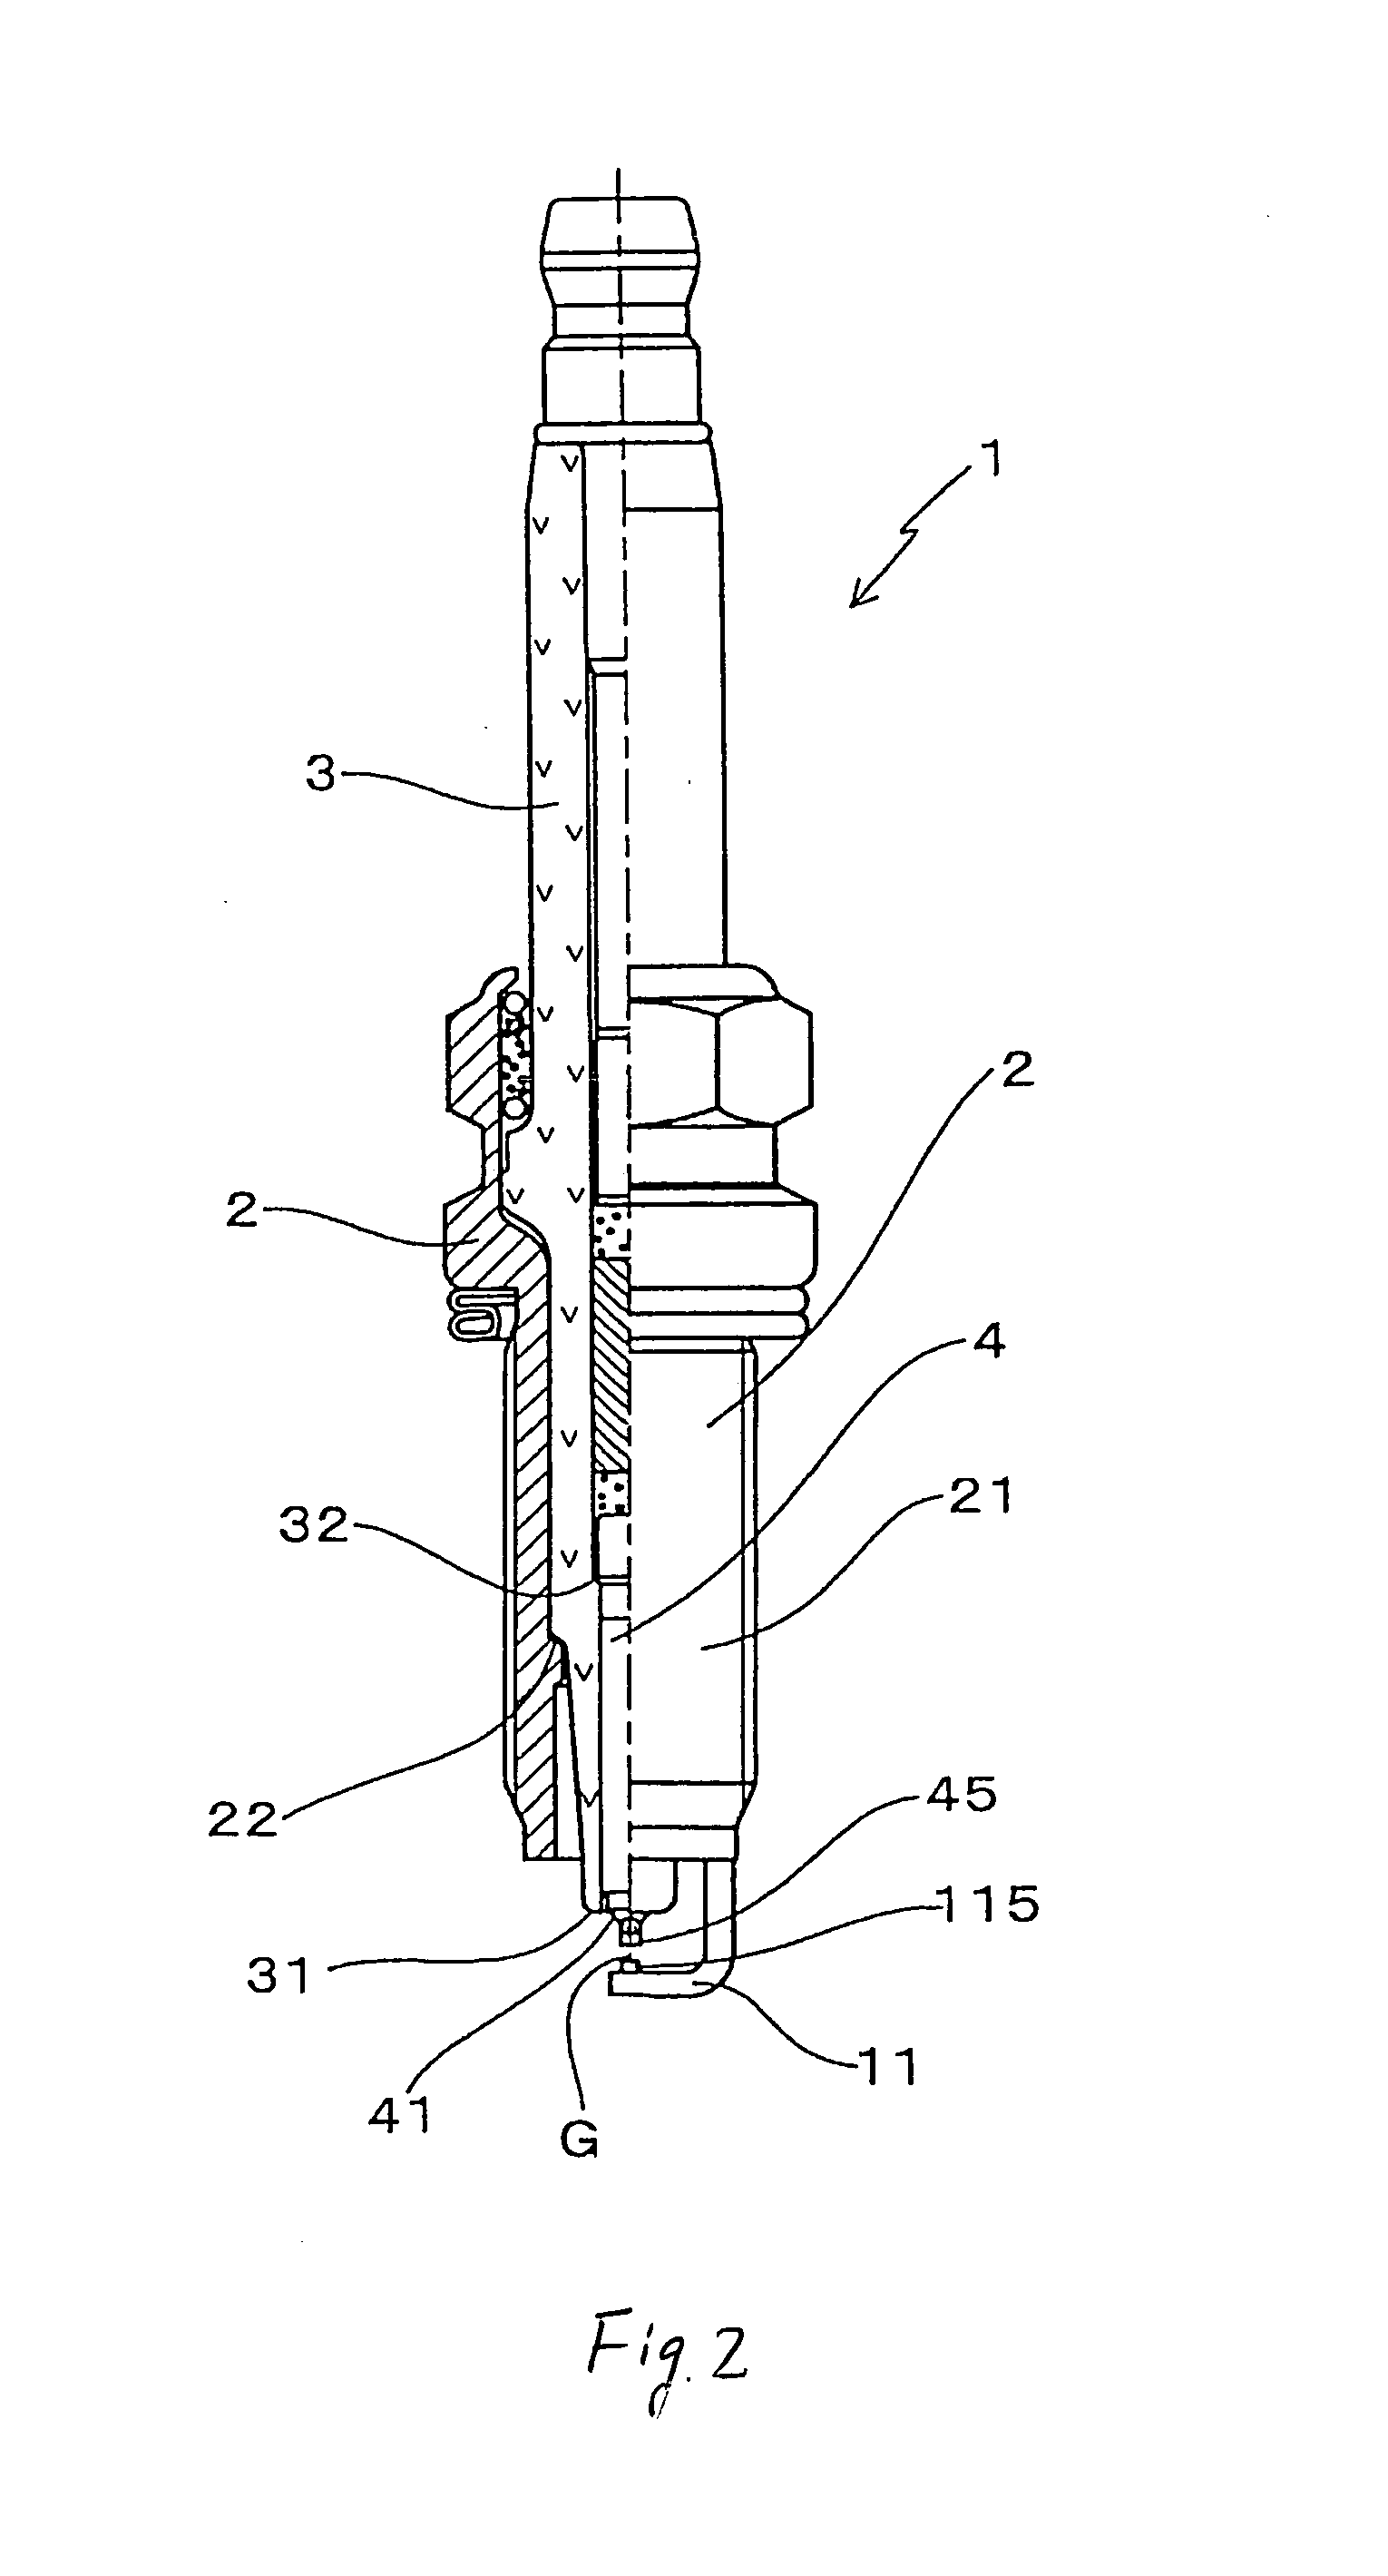 Compact structure of spark plug designed to ensure desired heat range